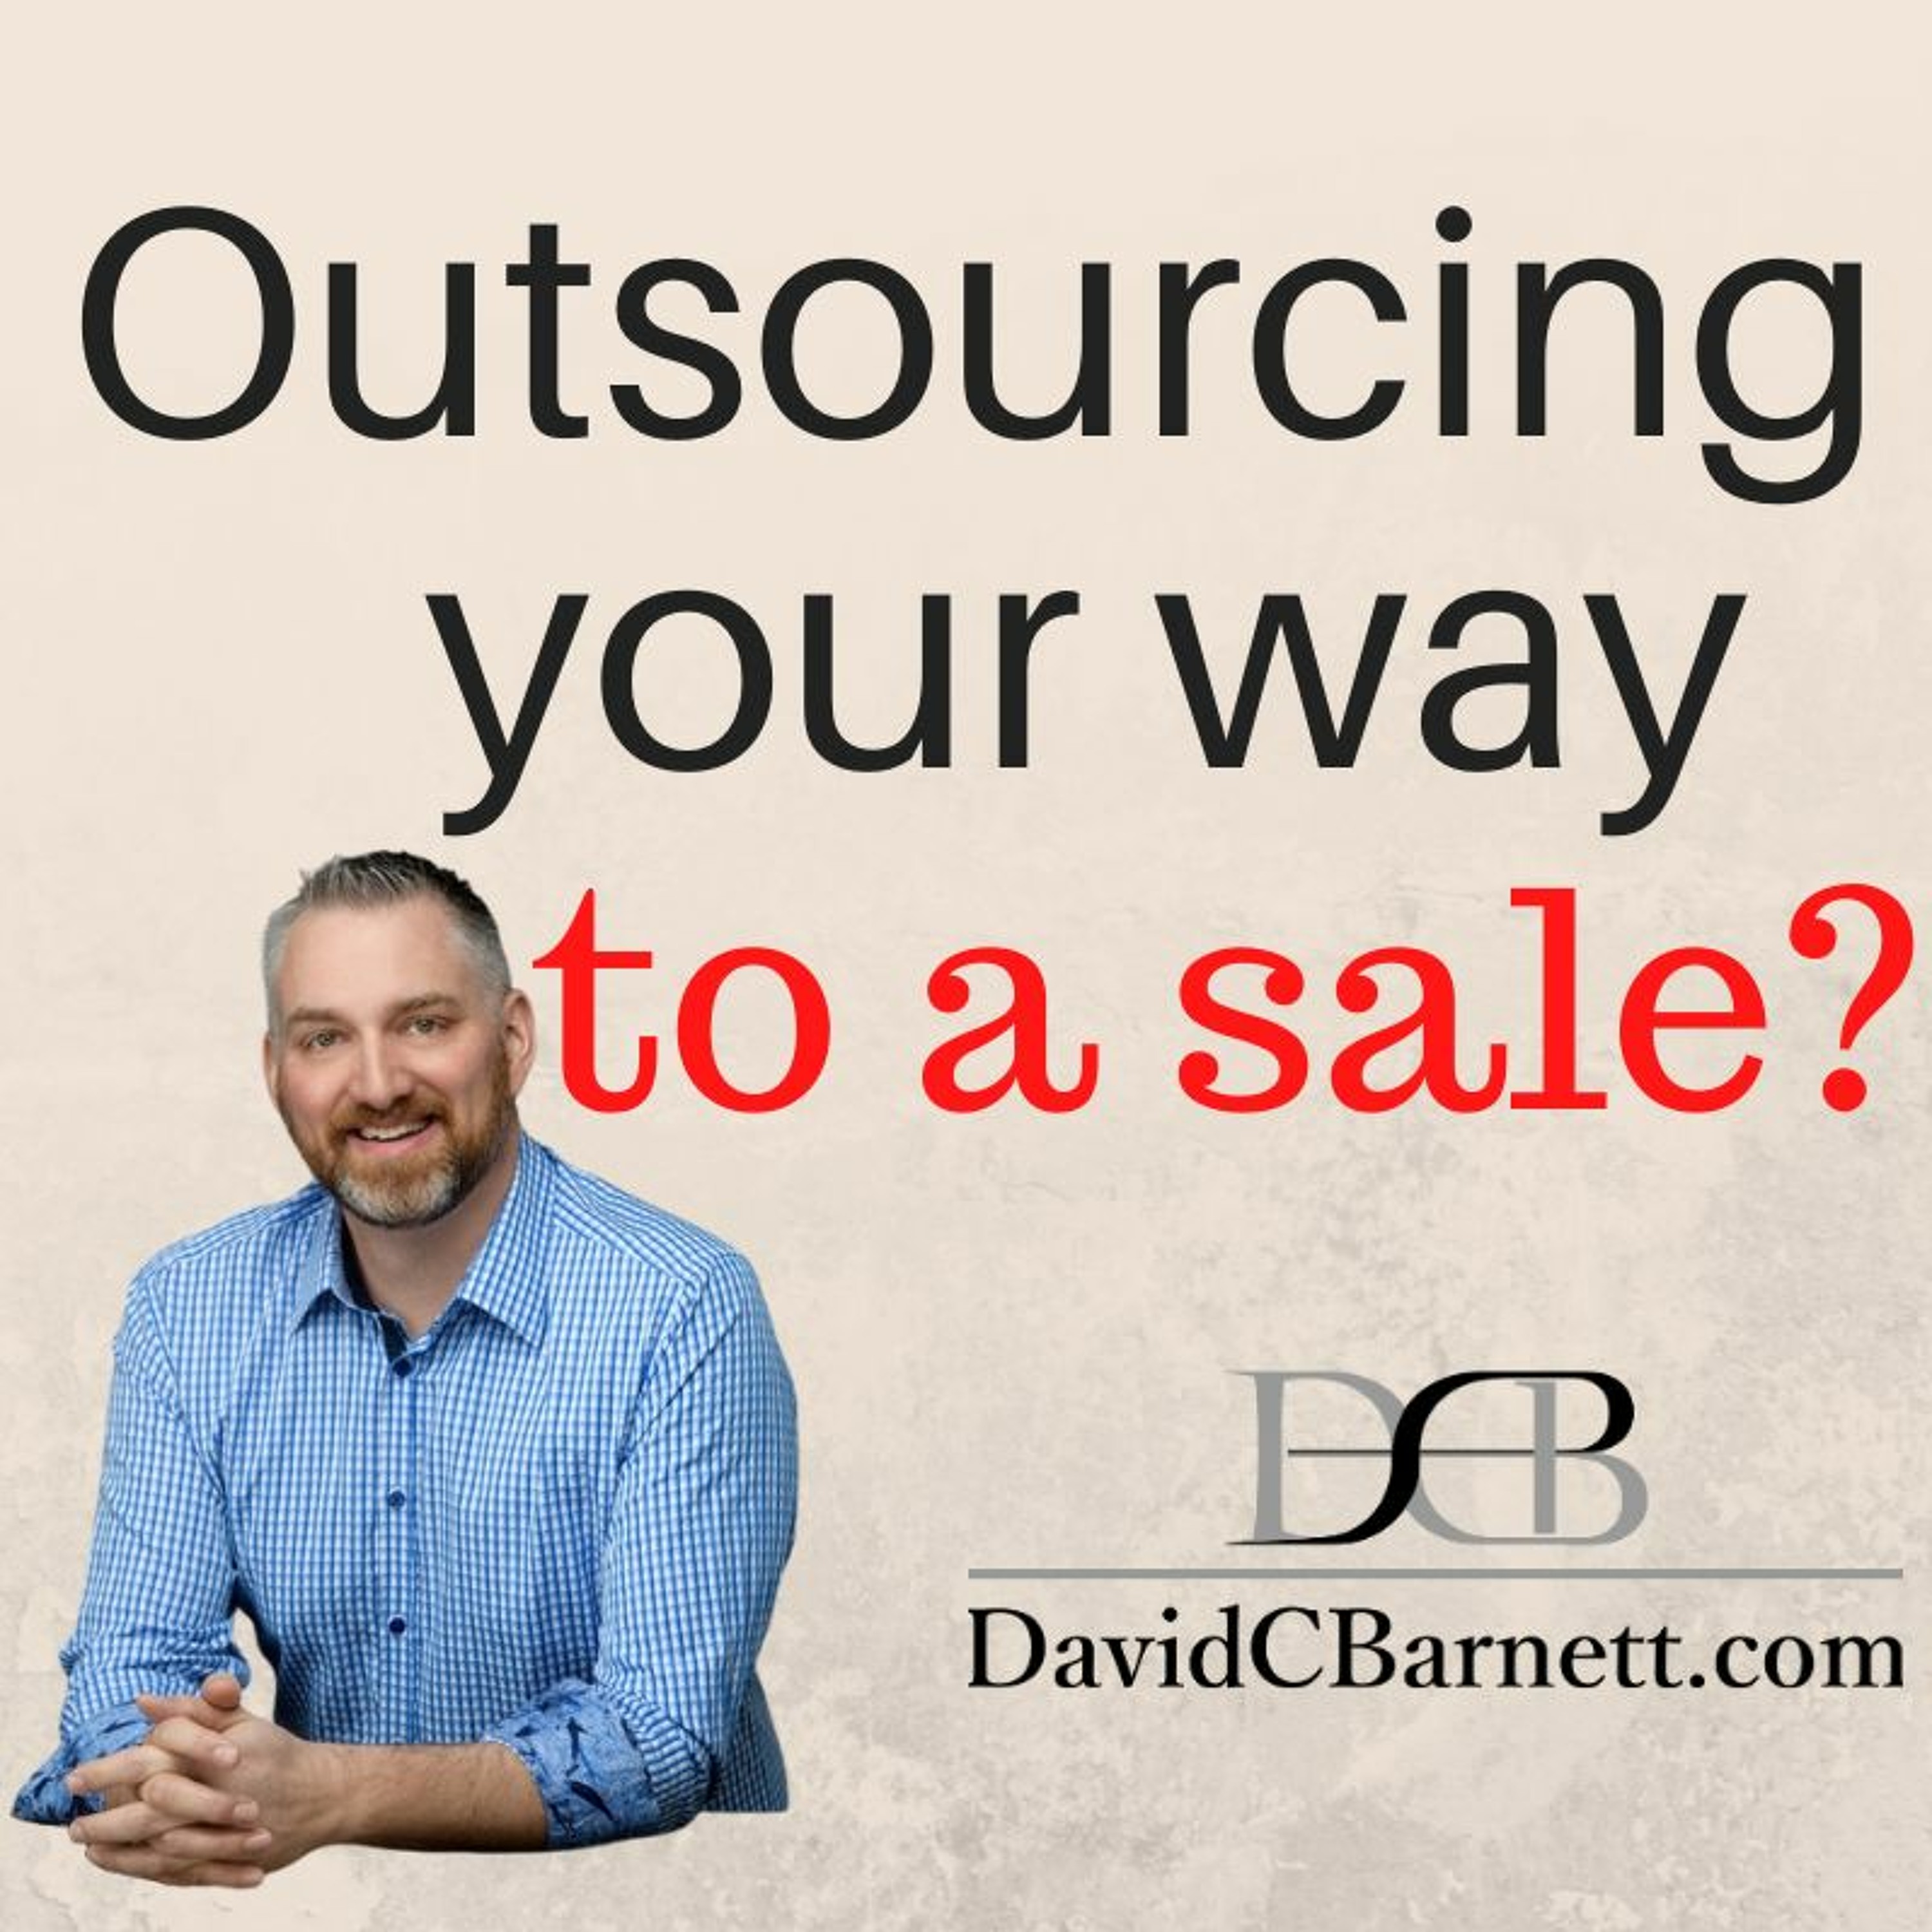 Outsourcing your way to a sale?